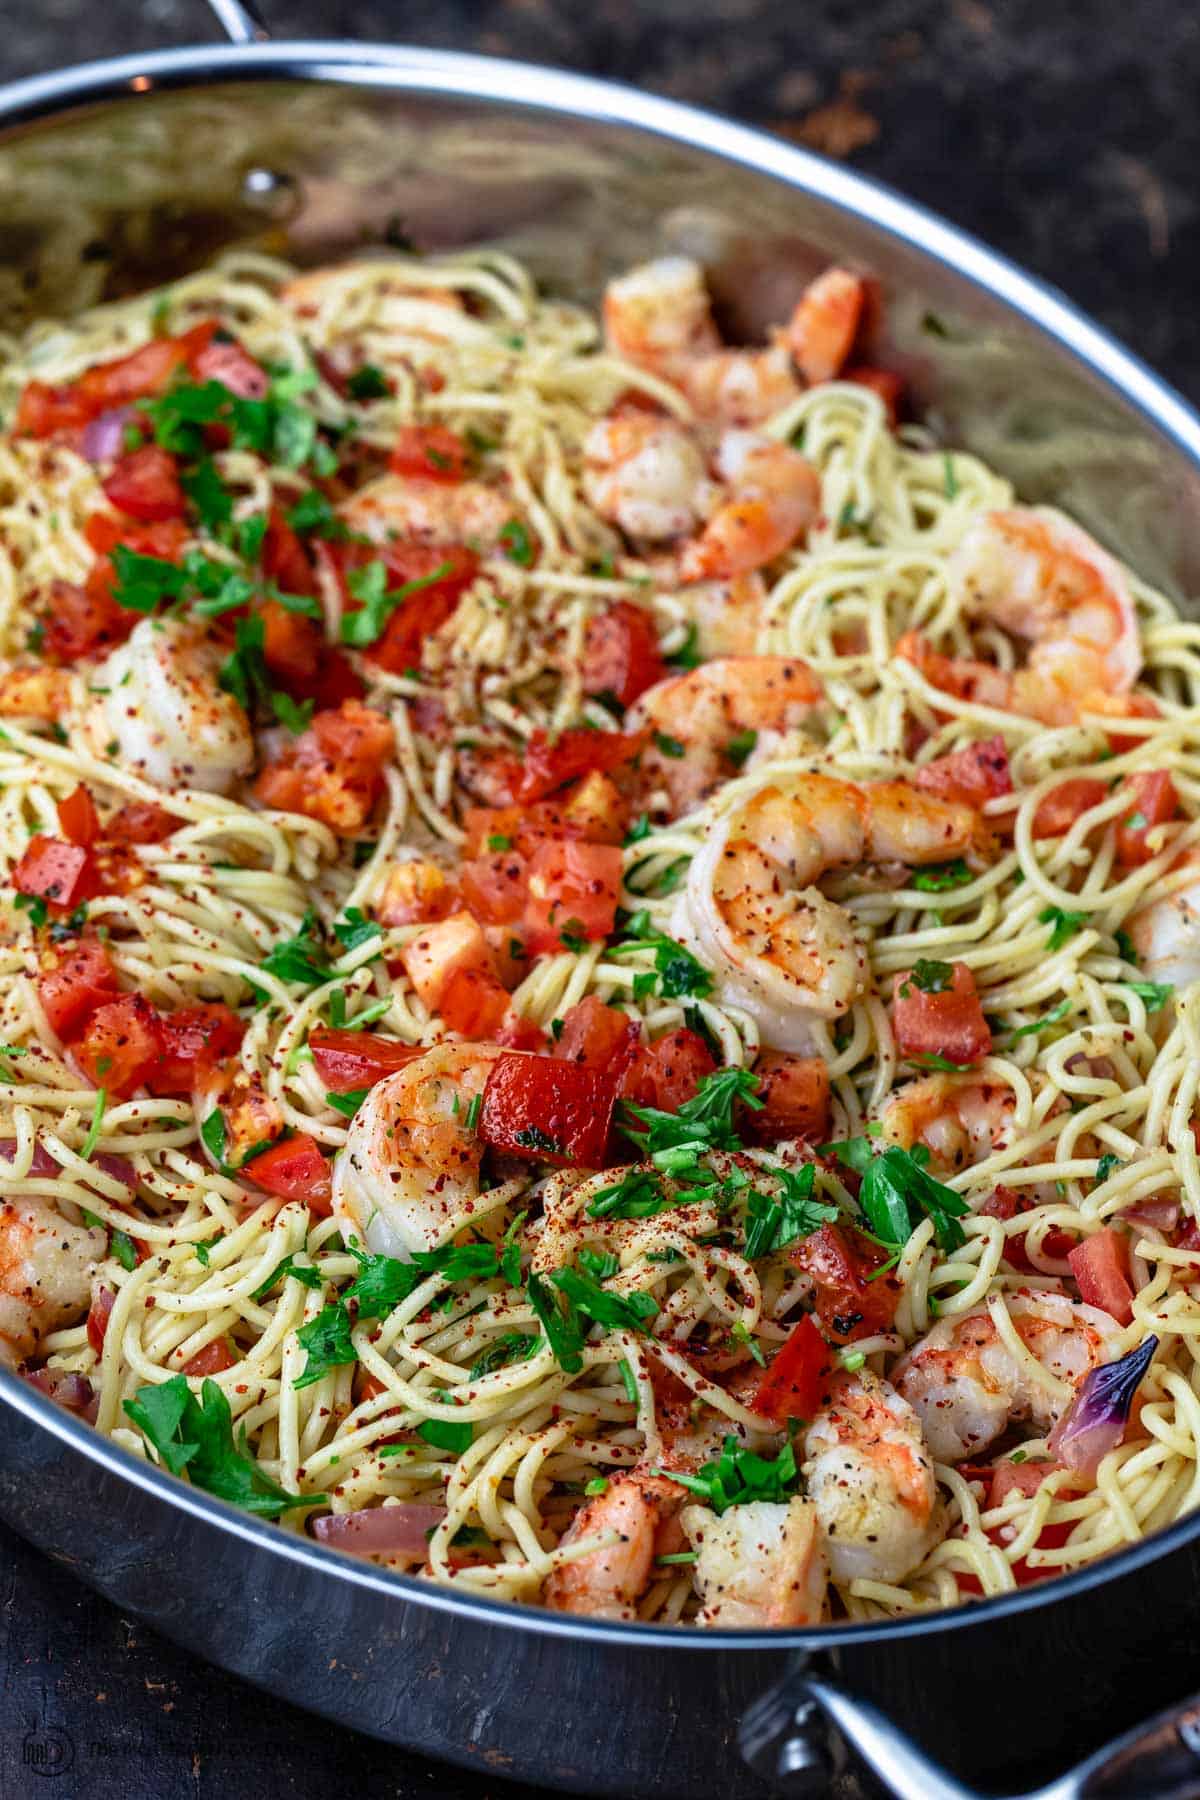 Shrimp pasta garnished with parsley and parmesan